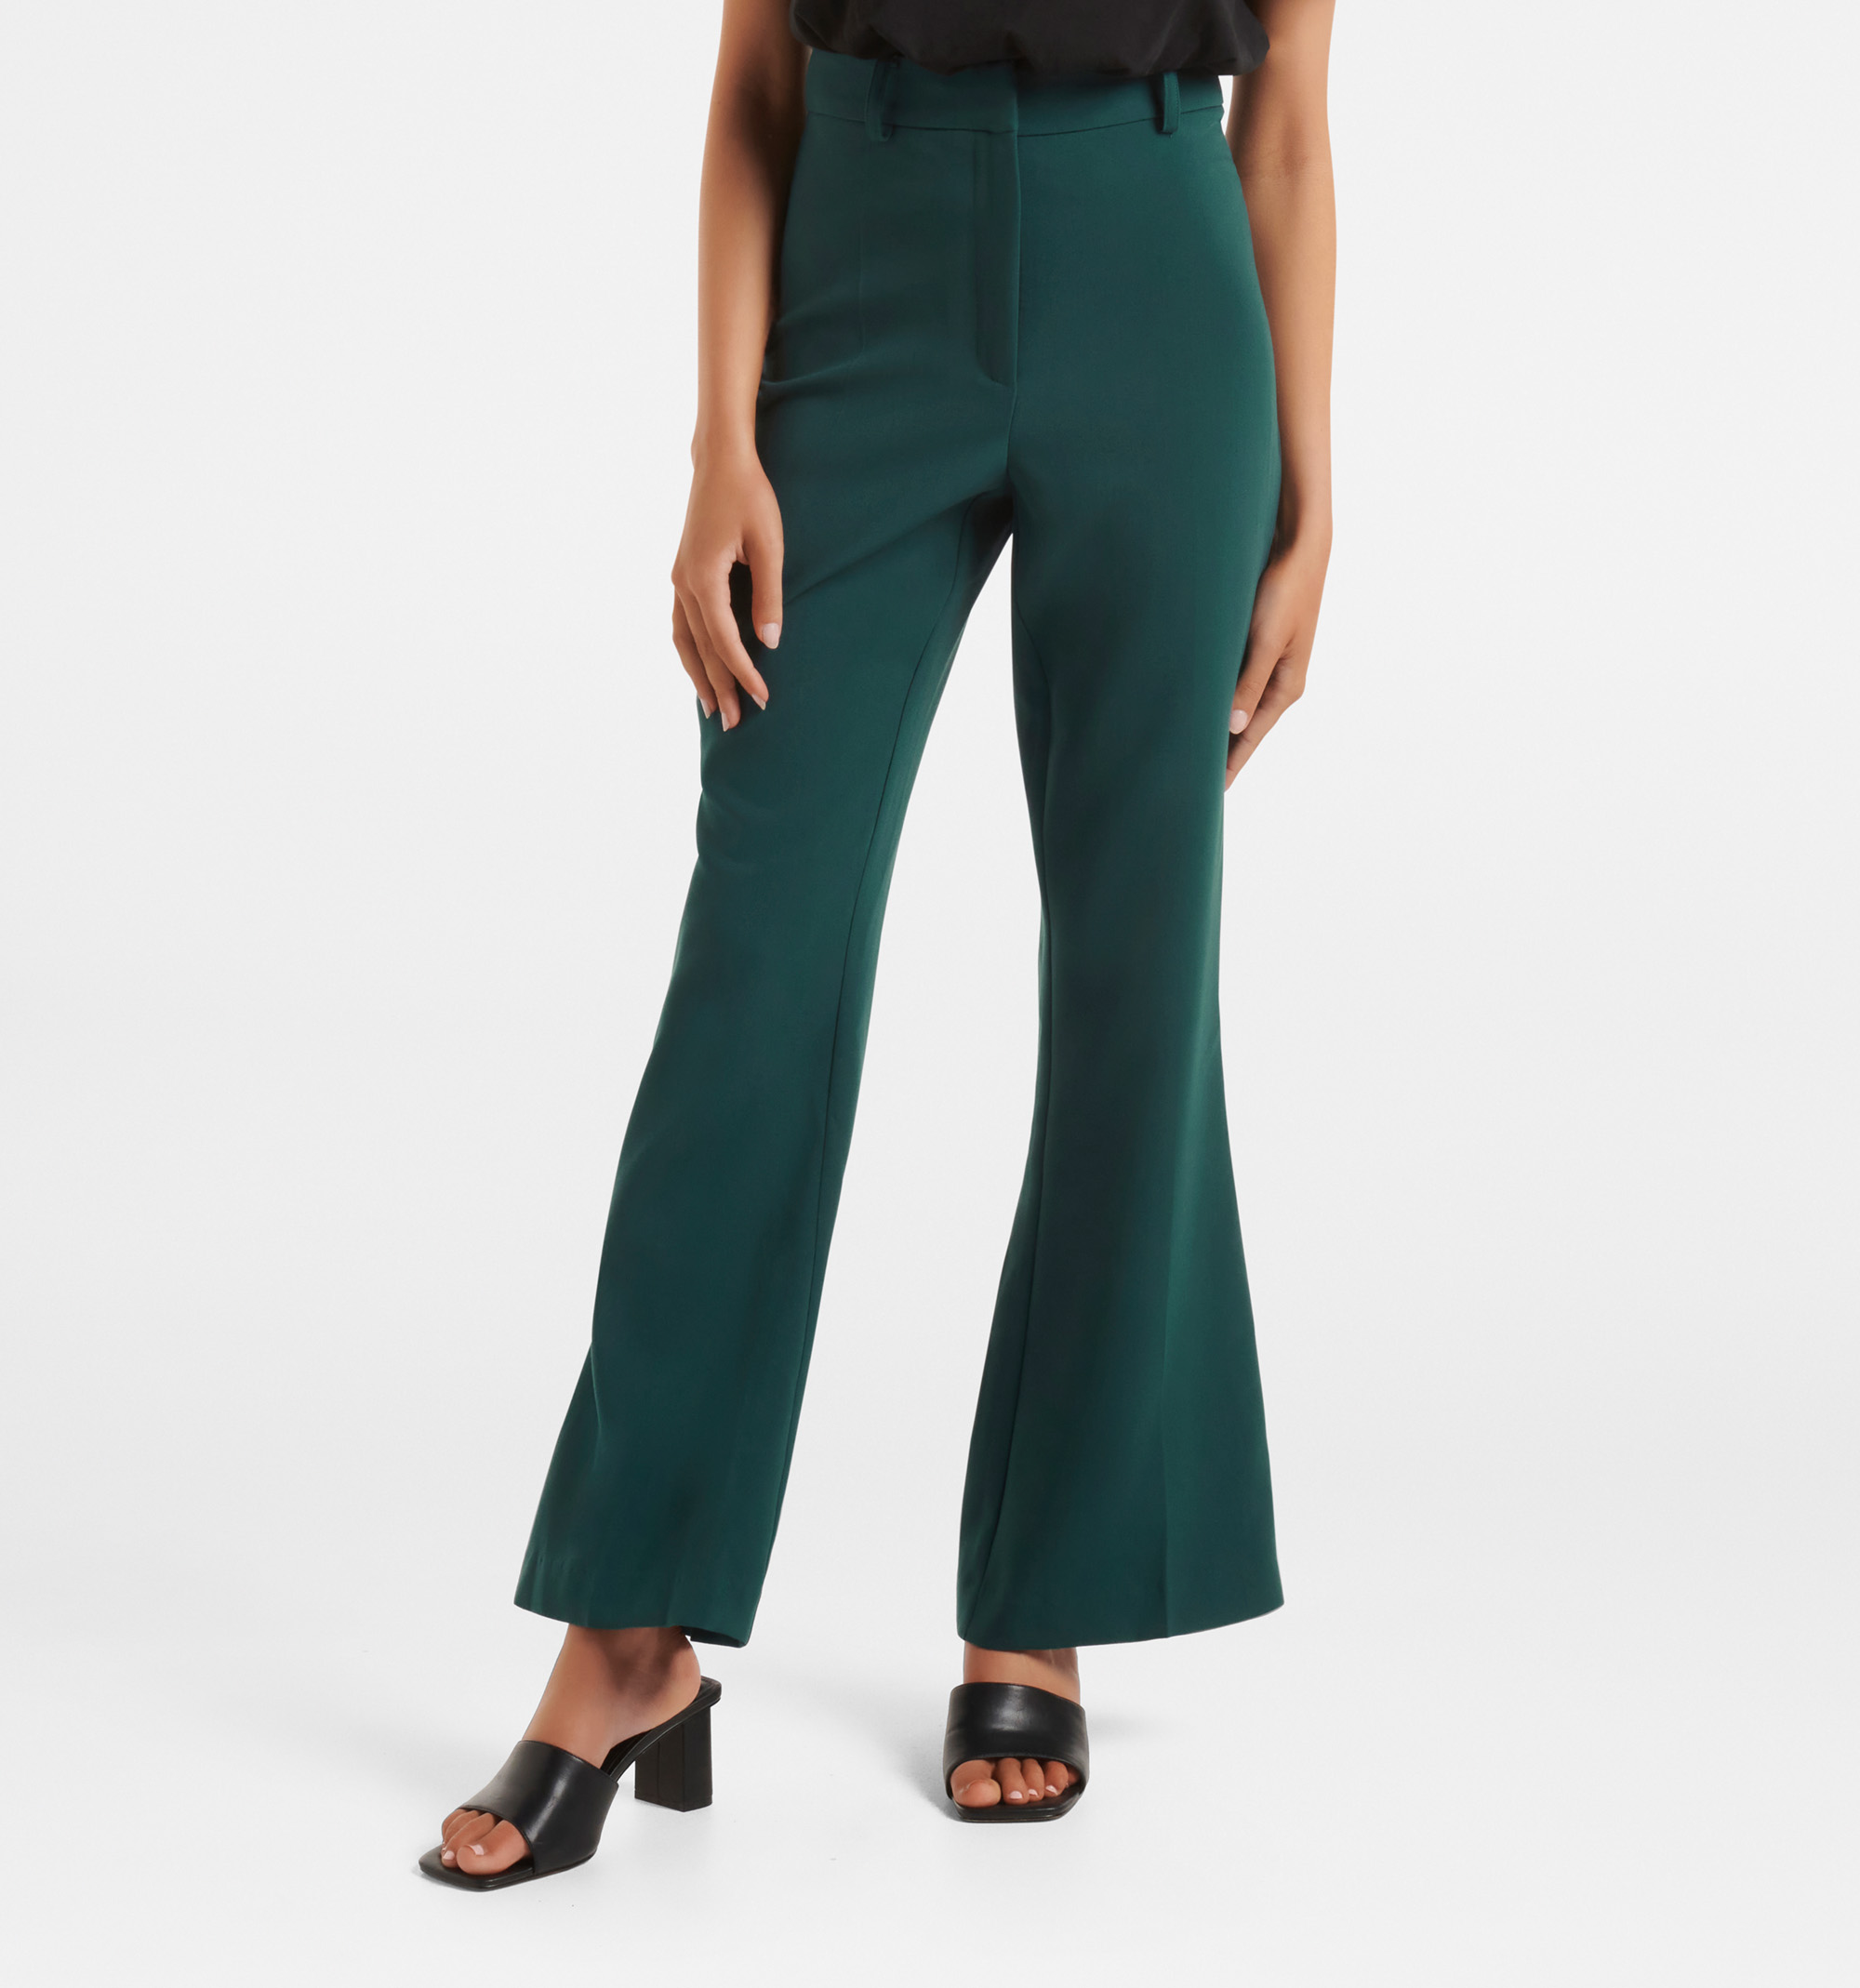 Buy FOREVER NEW Black Solid Comfort Fit Blended Women's Formal Wear Pant |  Shoppers Stop